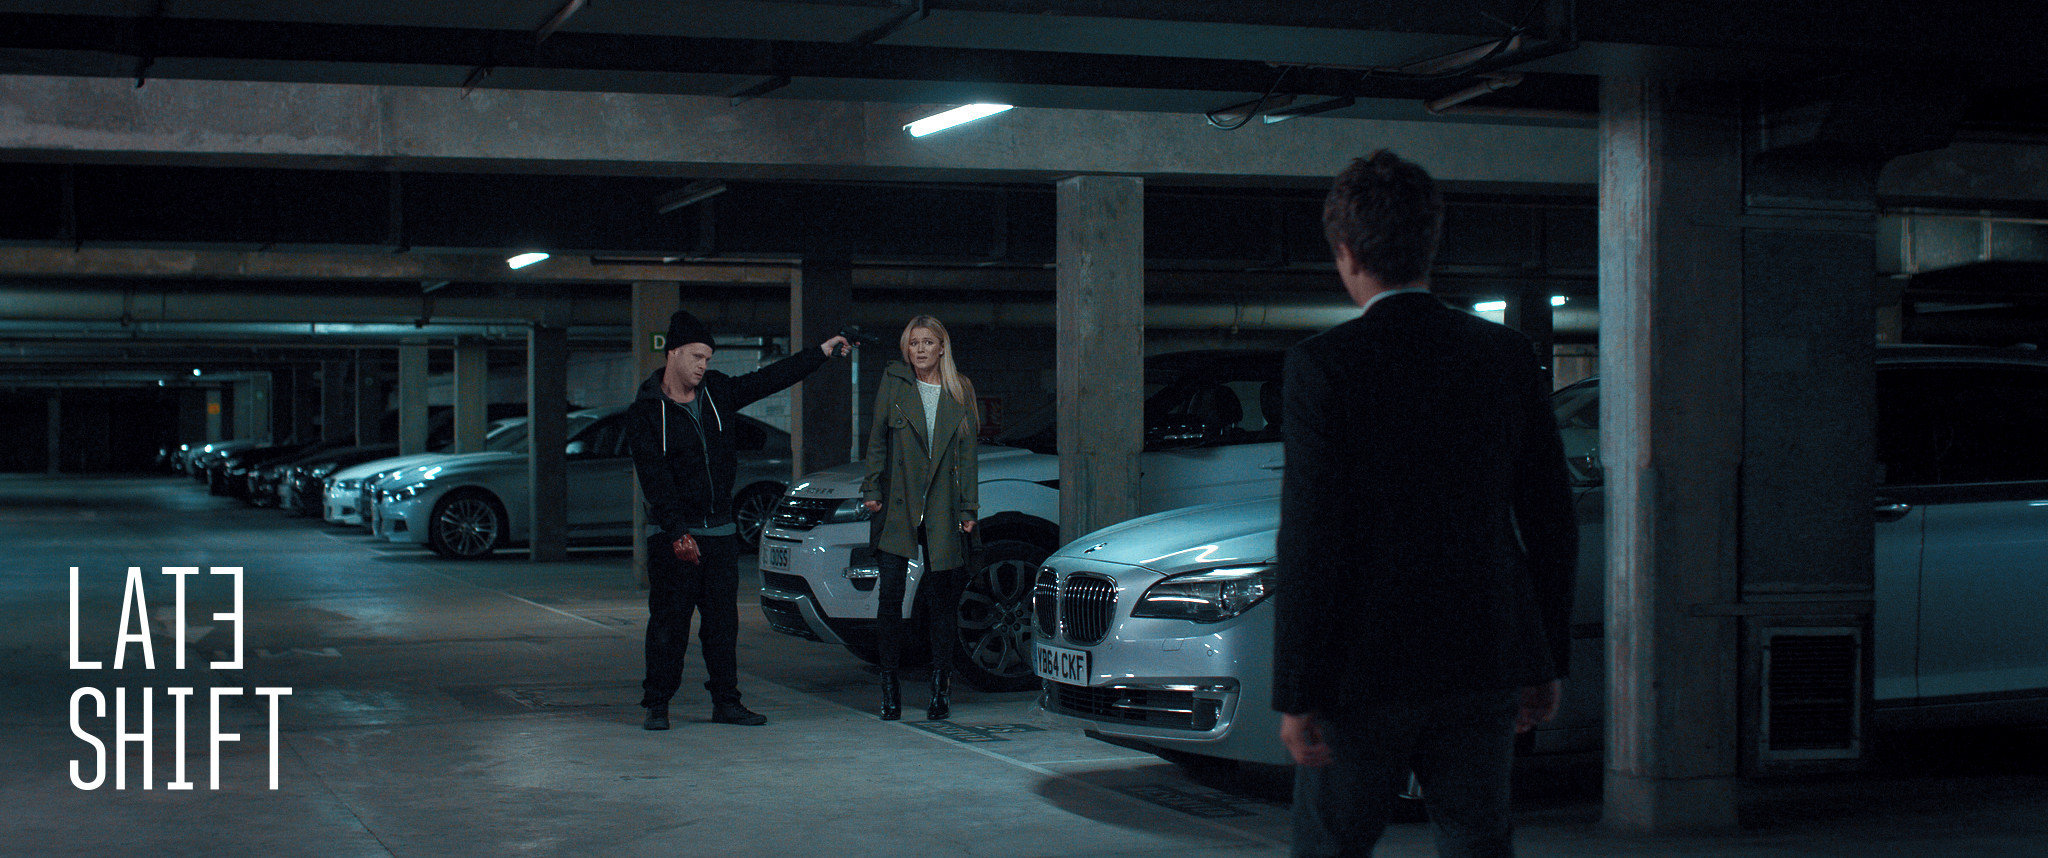 LATE SHIFT movie still. Johnny Sachon, Lily Travers and Joe Sowerbutts.